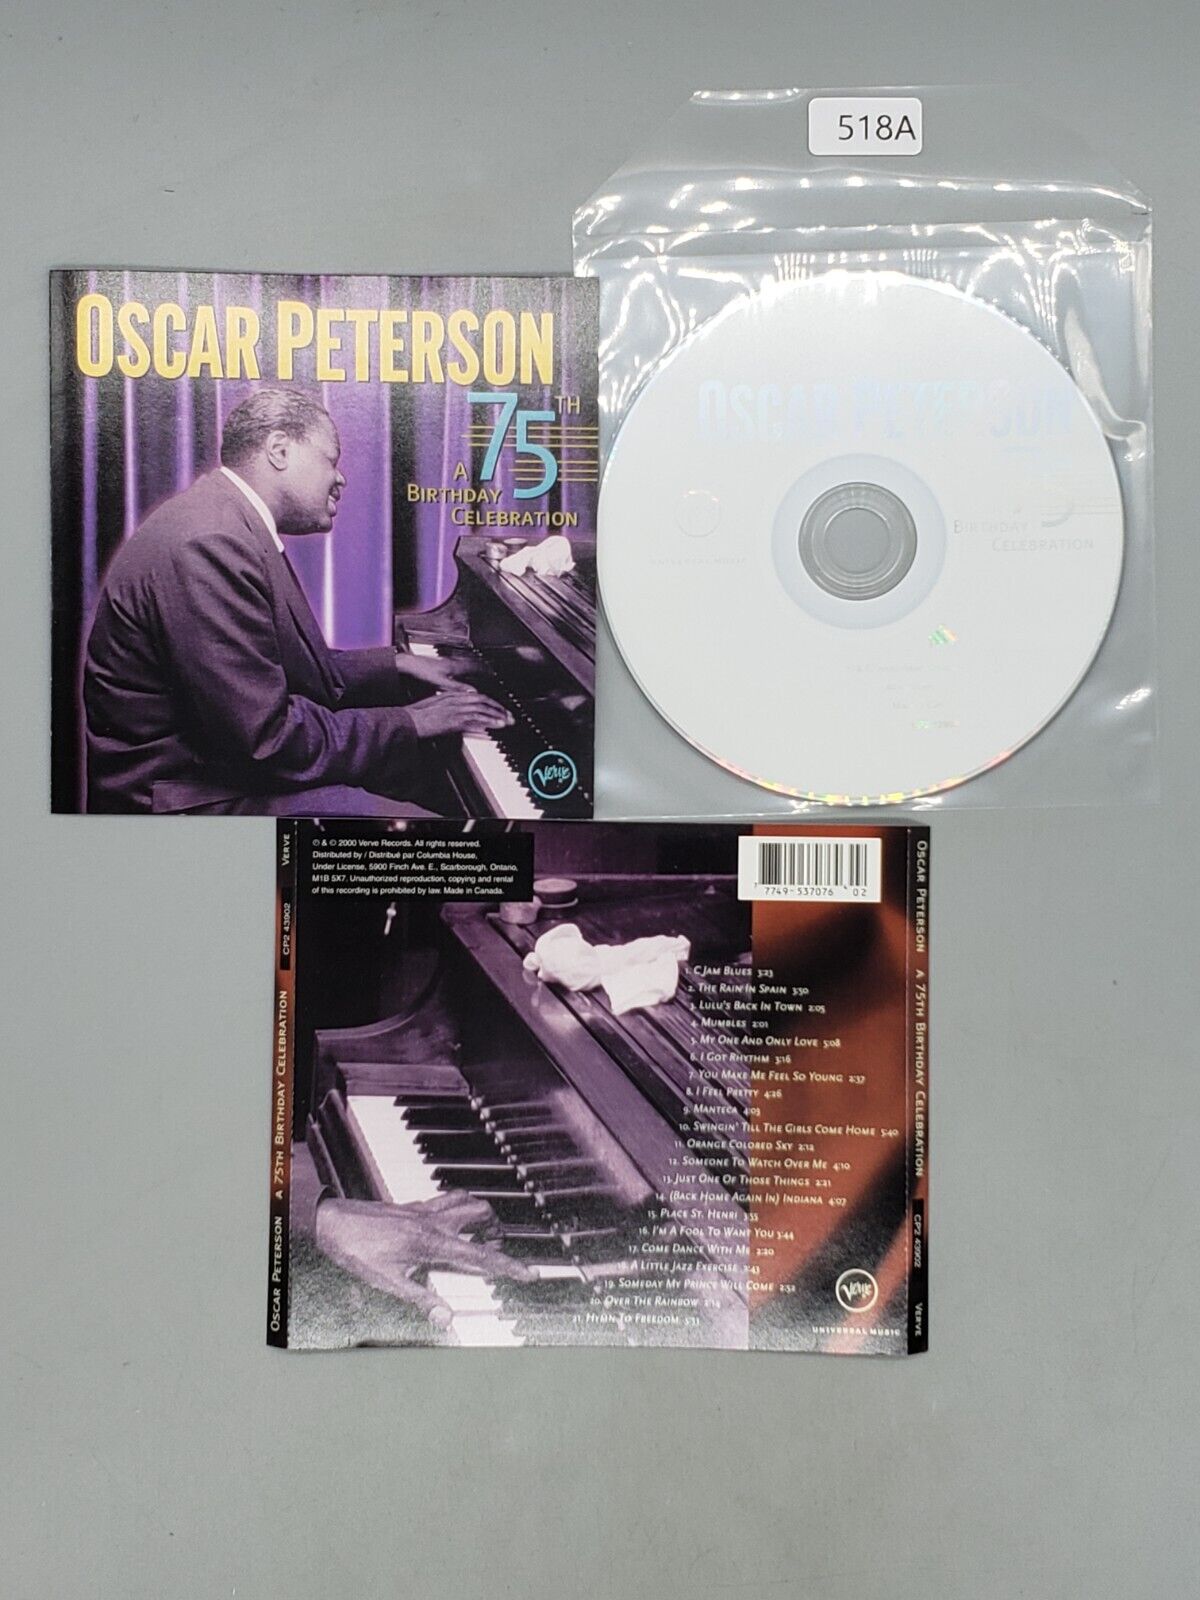 A 75th Birthday Celebration by Oscar Peterson (CD) Disc Only No Tracking